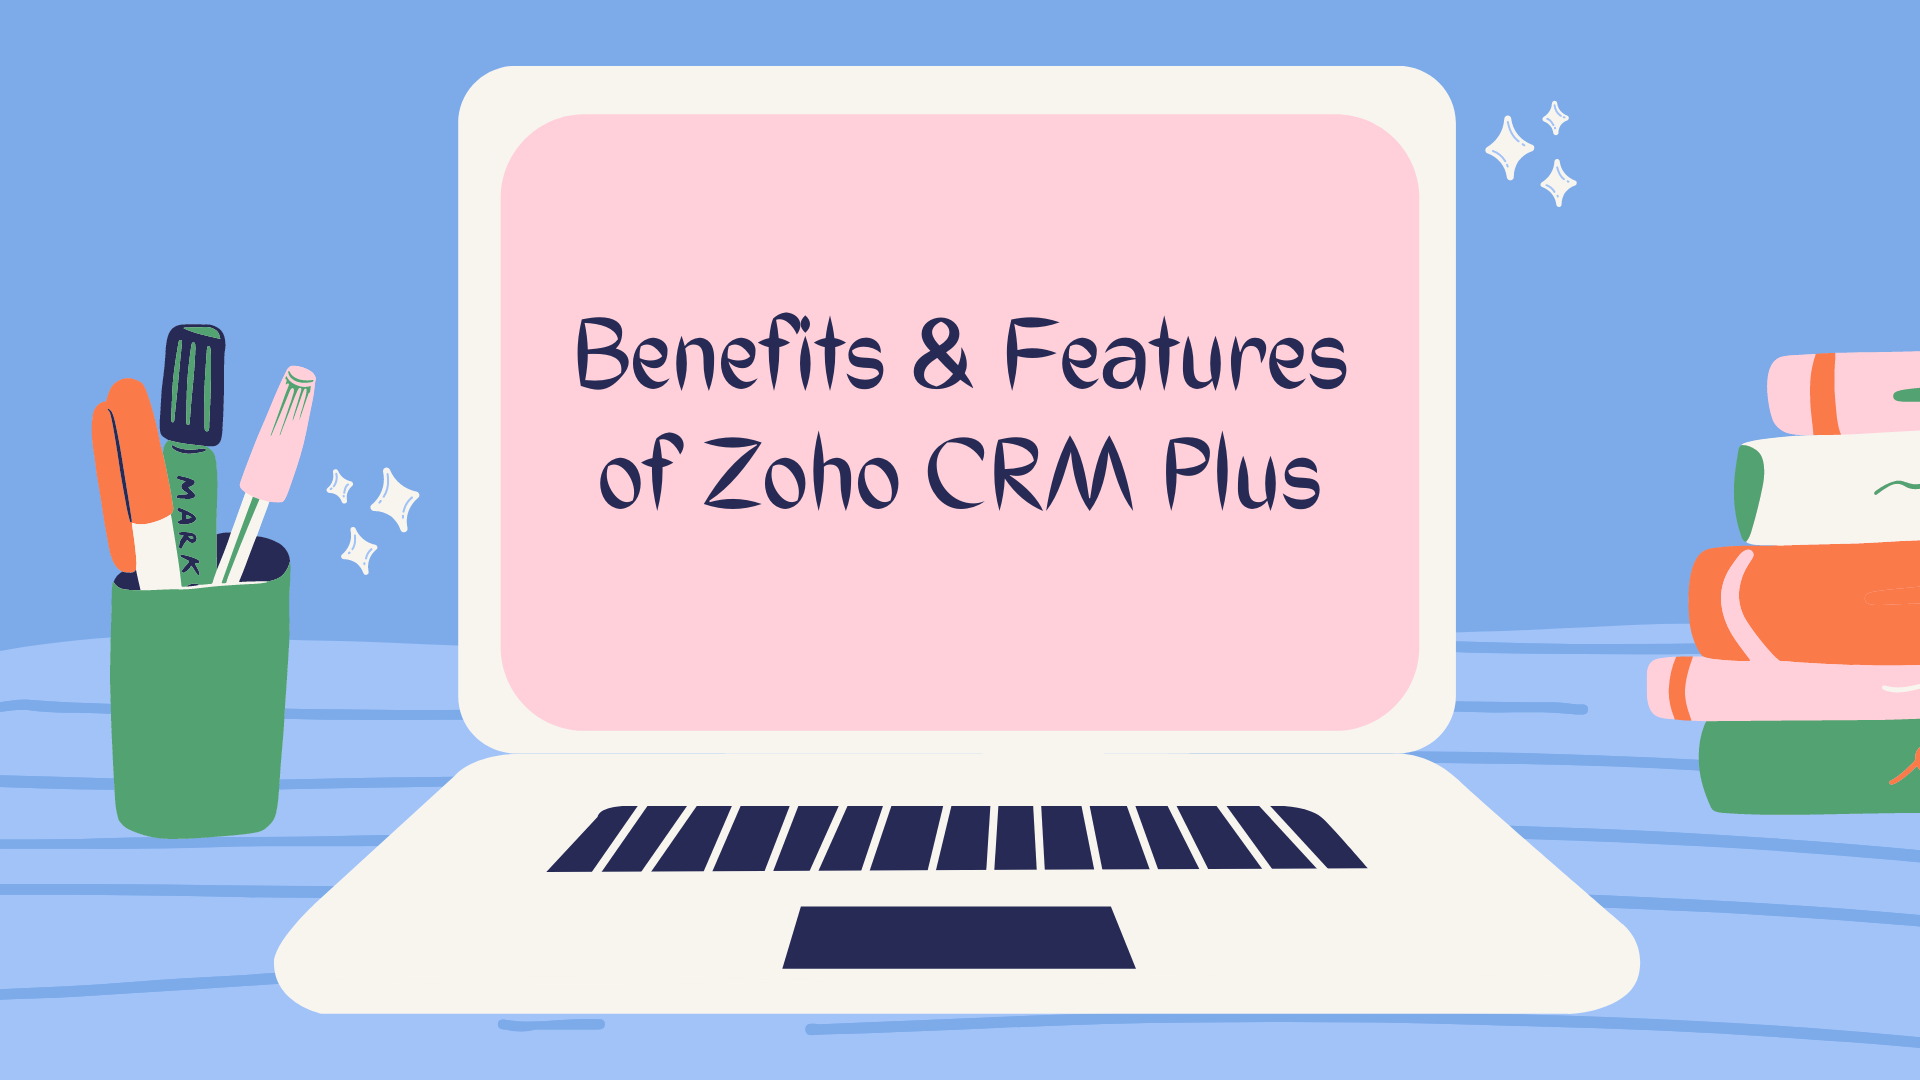 Benefits & Features of Zoho CRM Plus